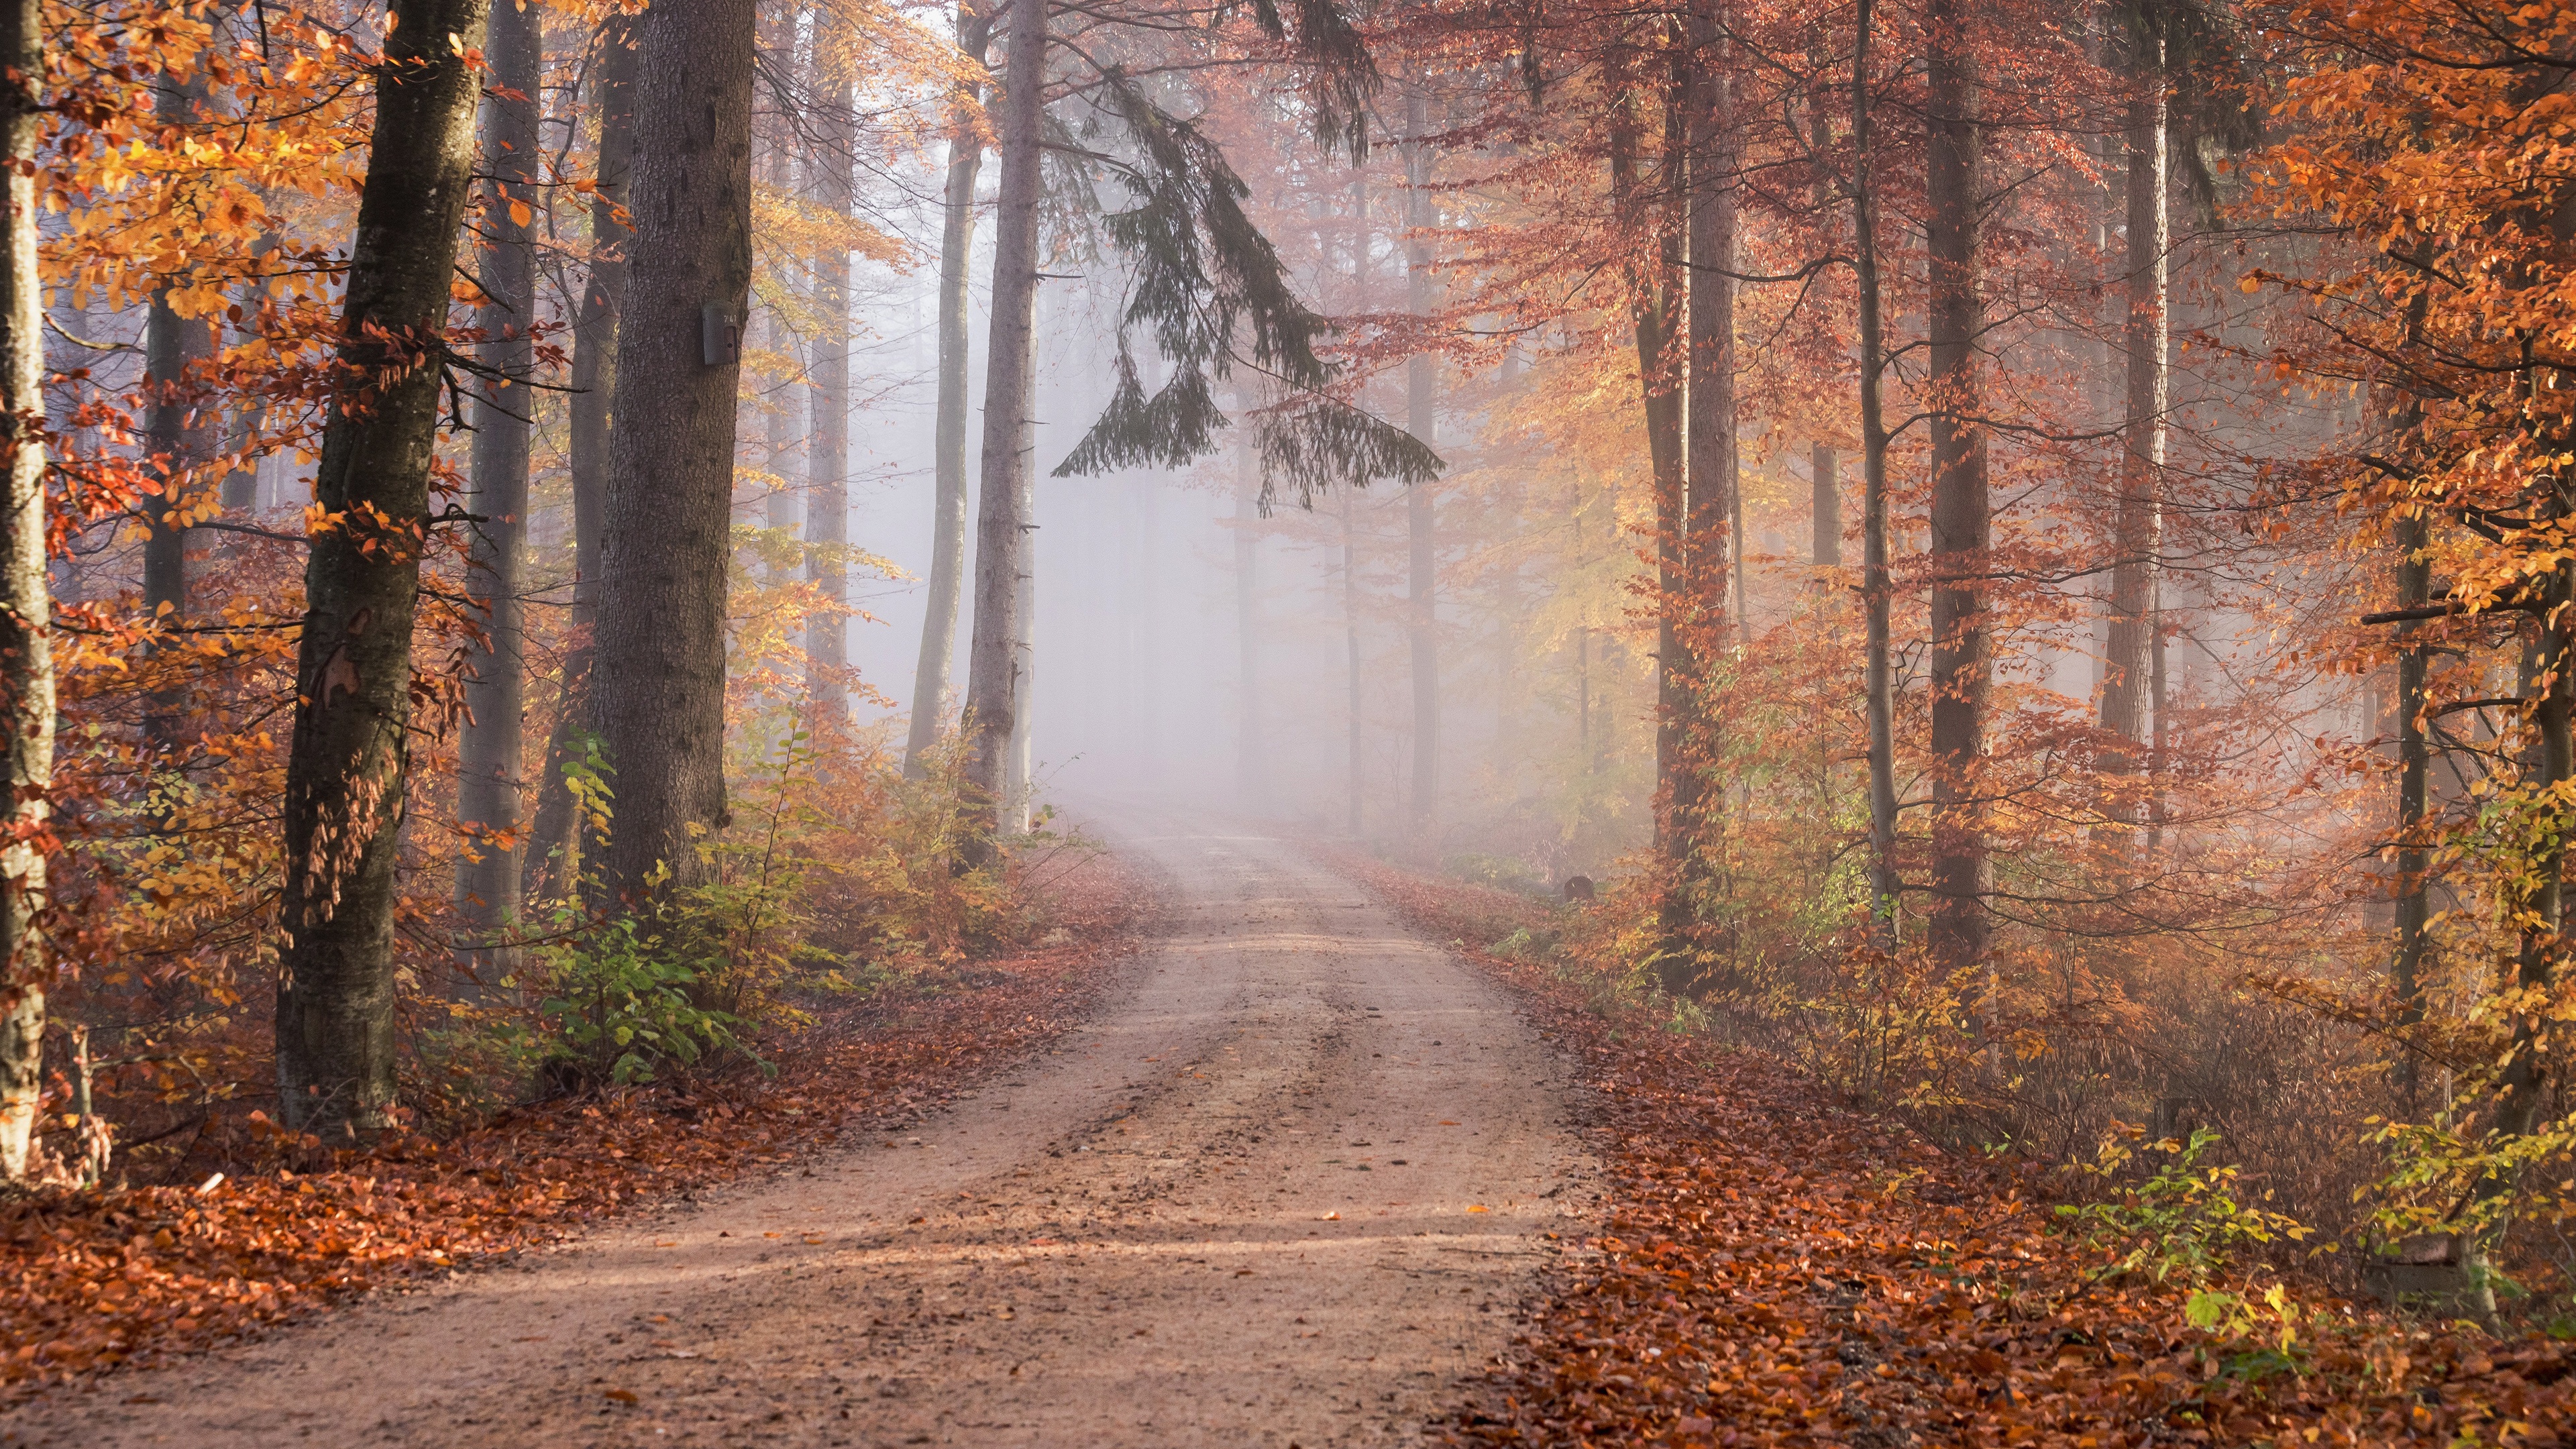 man made, path, fall, fog, forest, road, trunk